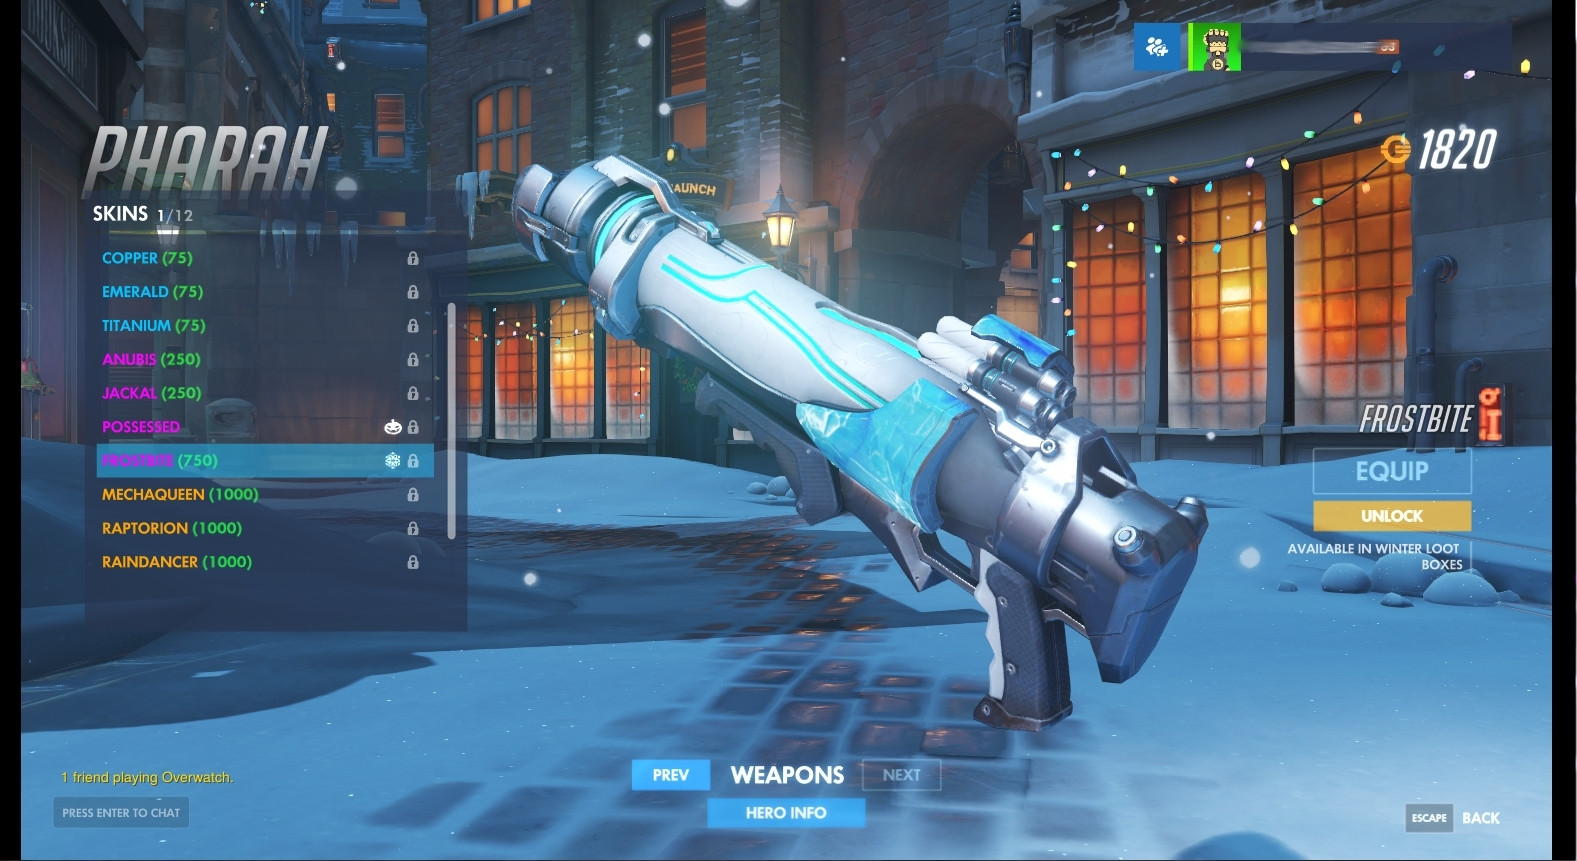 Pharah (Frostbite) Weapon